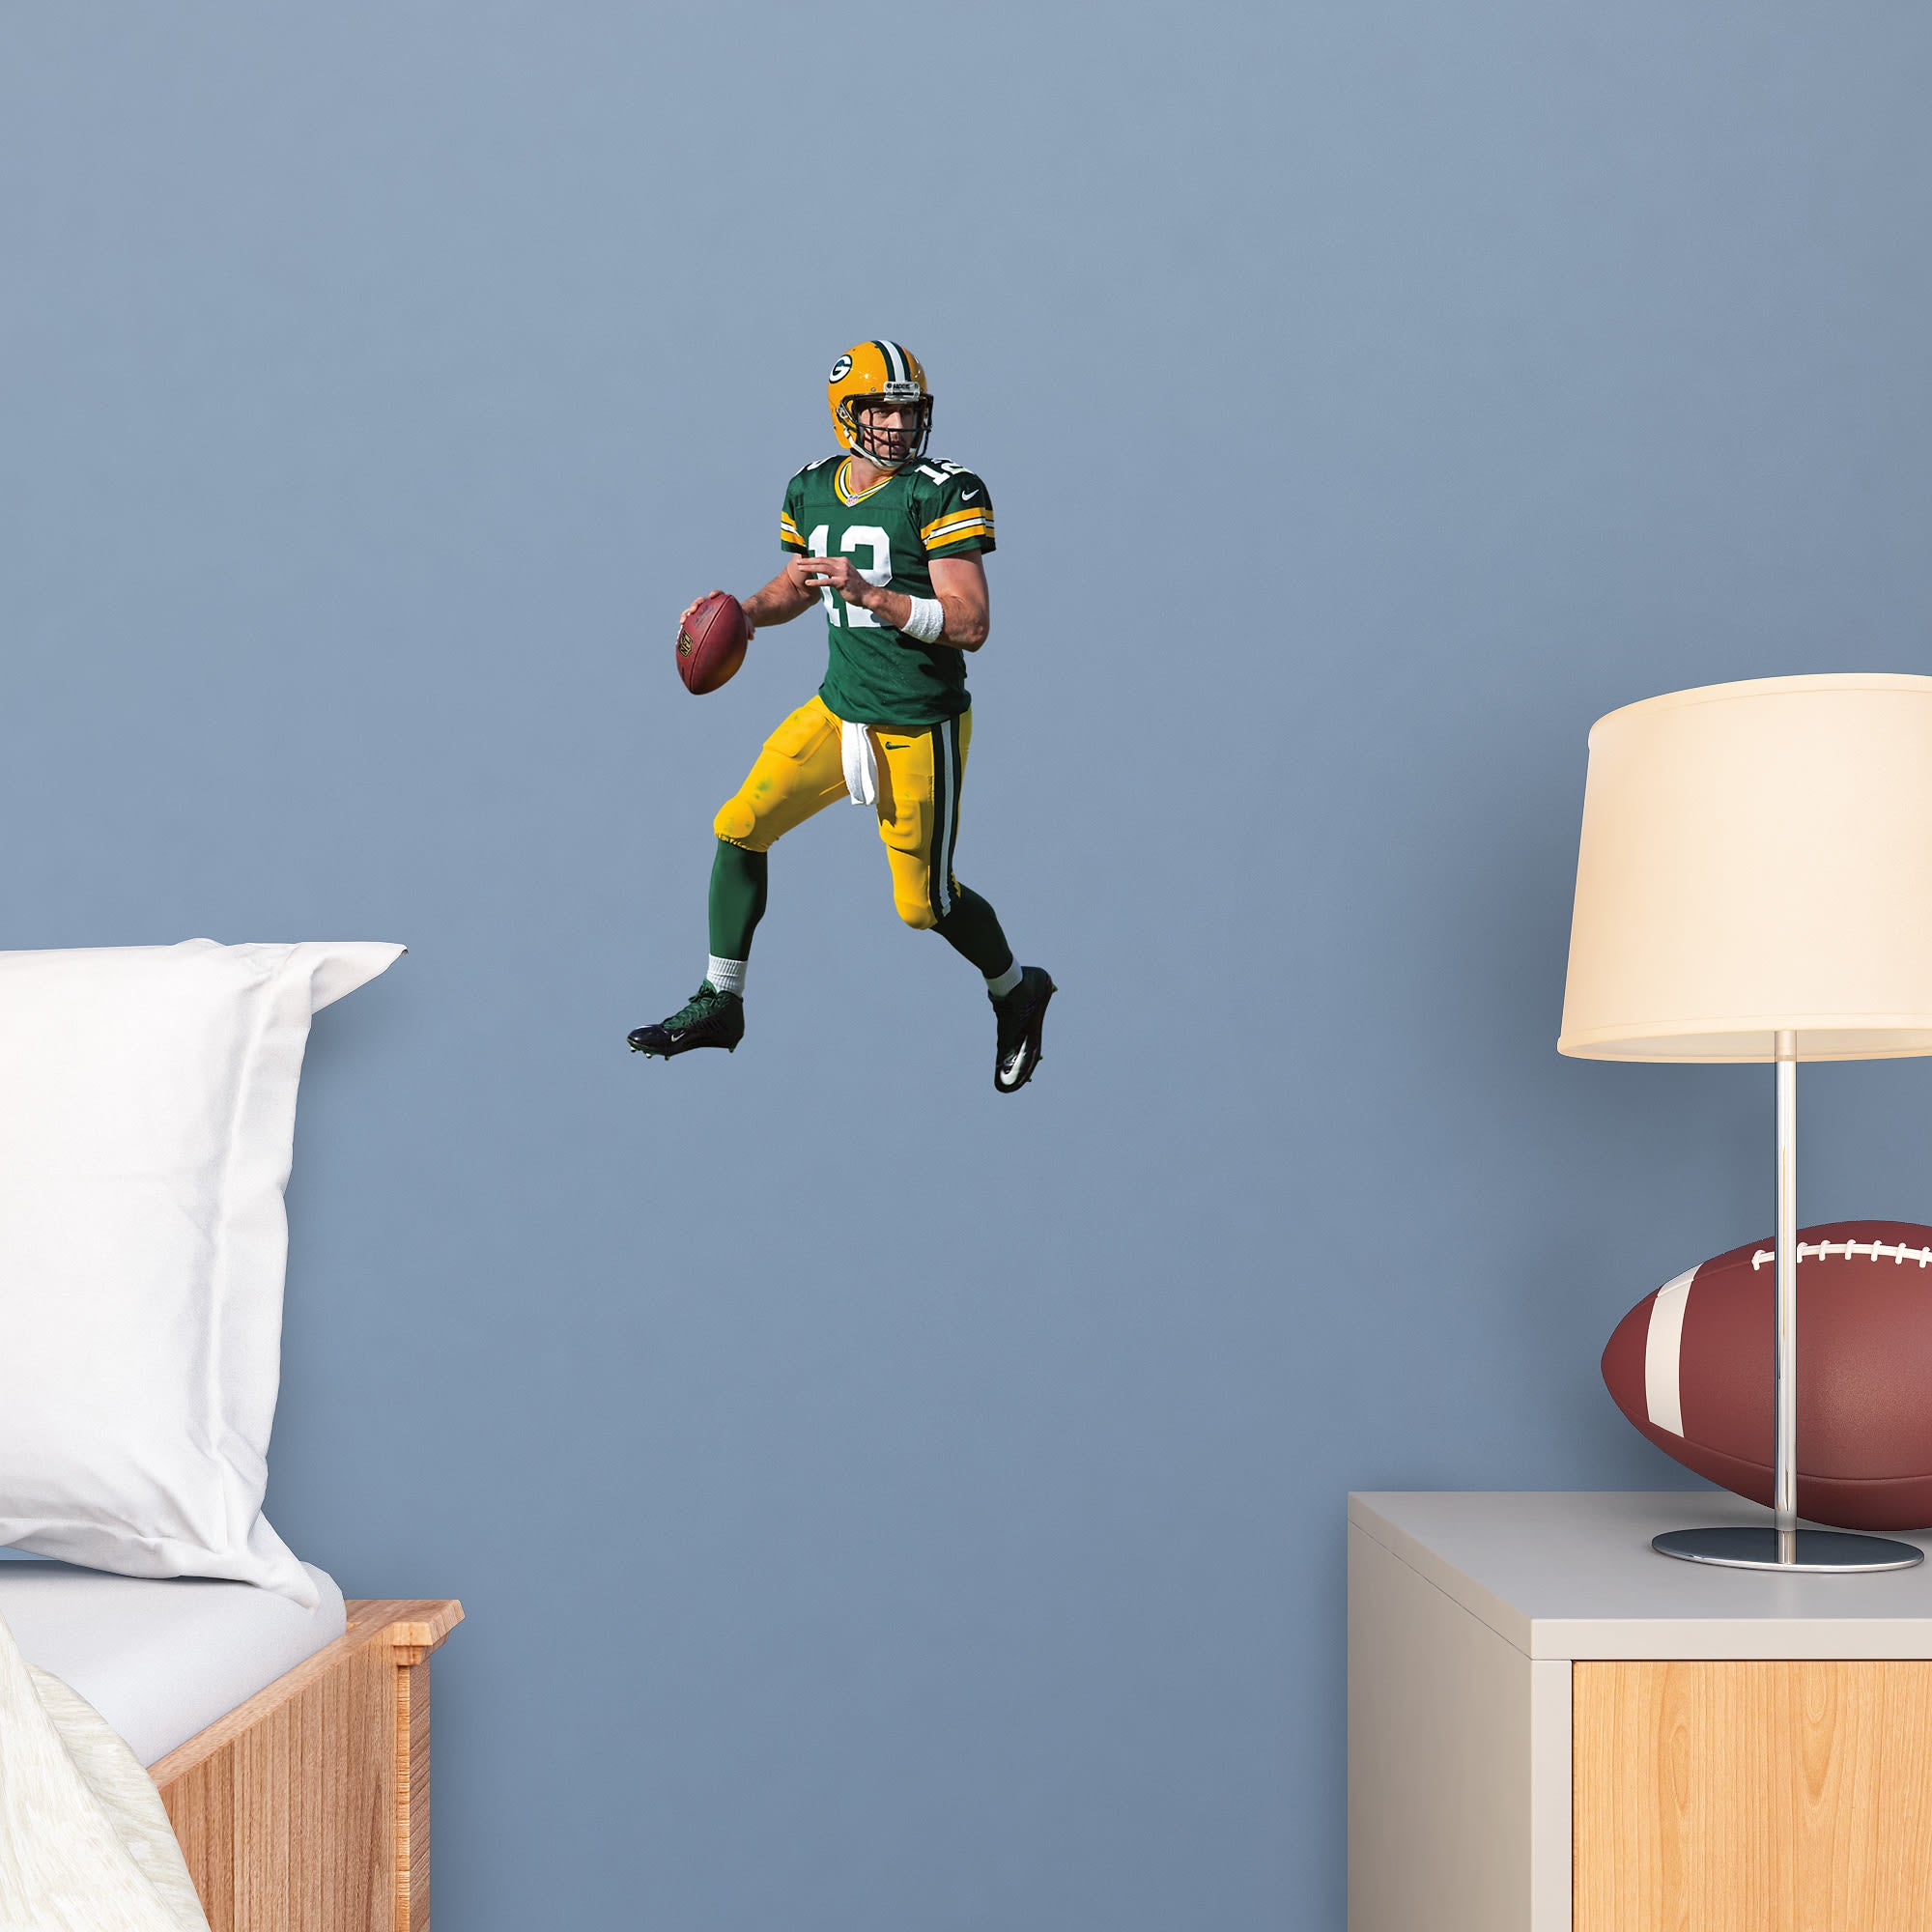 Aaron Rodgers for Green Bay Packers - Officially Licensed NFL Removable Wall Decal 9.5"W x 16.5"H by Fathead | Vinyl